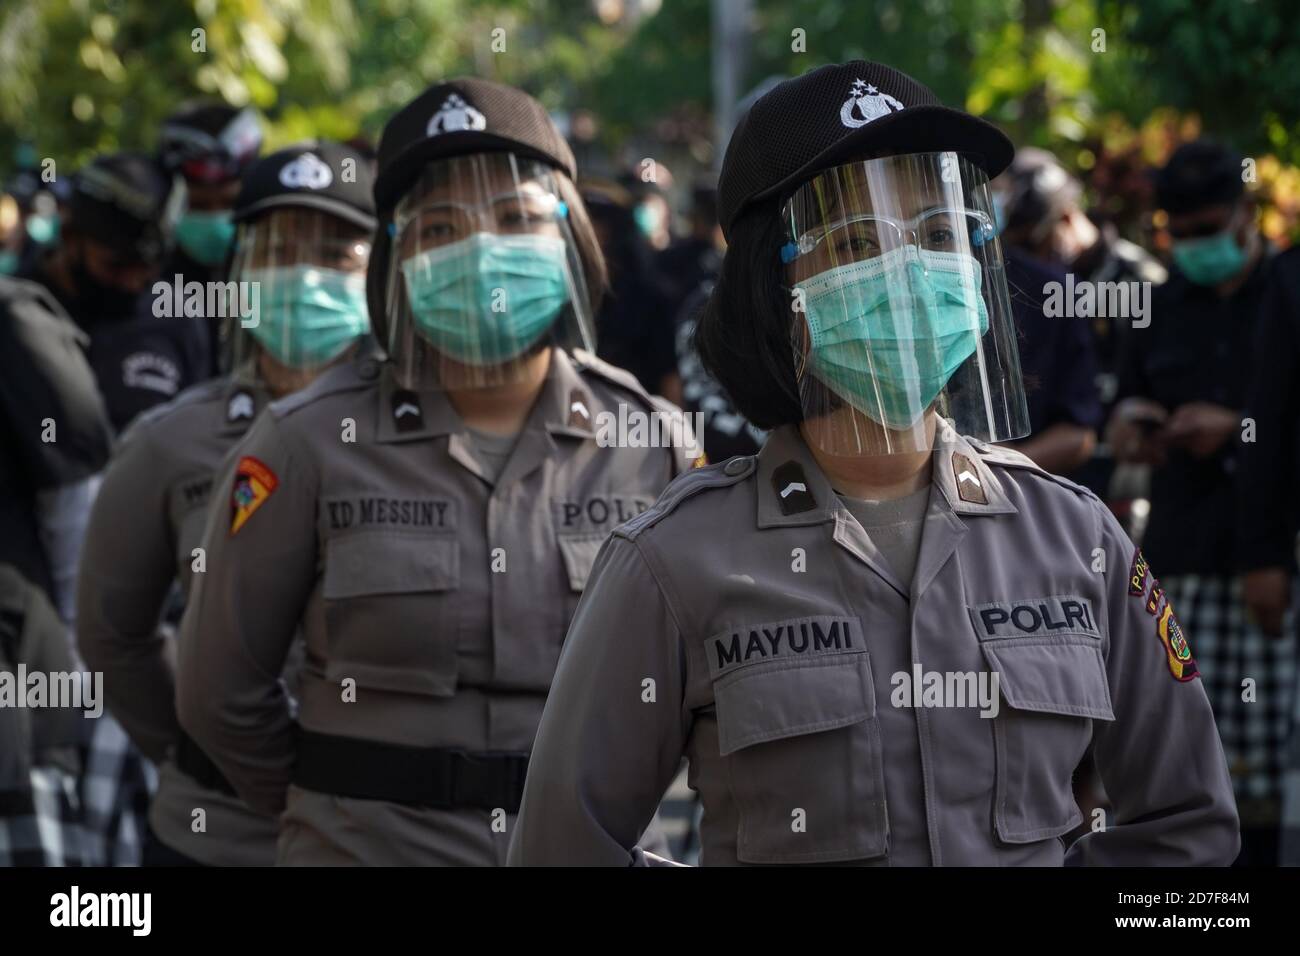 Denpasar, Bali, Indonesia. 22nd Oct, 2020. Police women standby in line wearing faceshields. Students and laborers staged again the second mass rallies called ''Bali Tidak Diam'' (Bali are Not Silent) in front of Udayana University, to support Indonesian laborers of the new rule; Omnibus Law. This new law was created by Indonesian parliament which fears of crippling laborers rights and harm the environment. Credit: Dicky Bisinglasi/ZUMA Wire/Alamy Live News Stock Photo